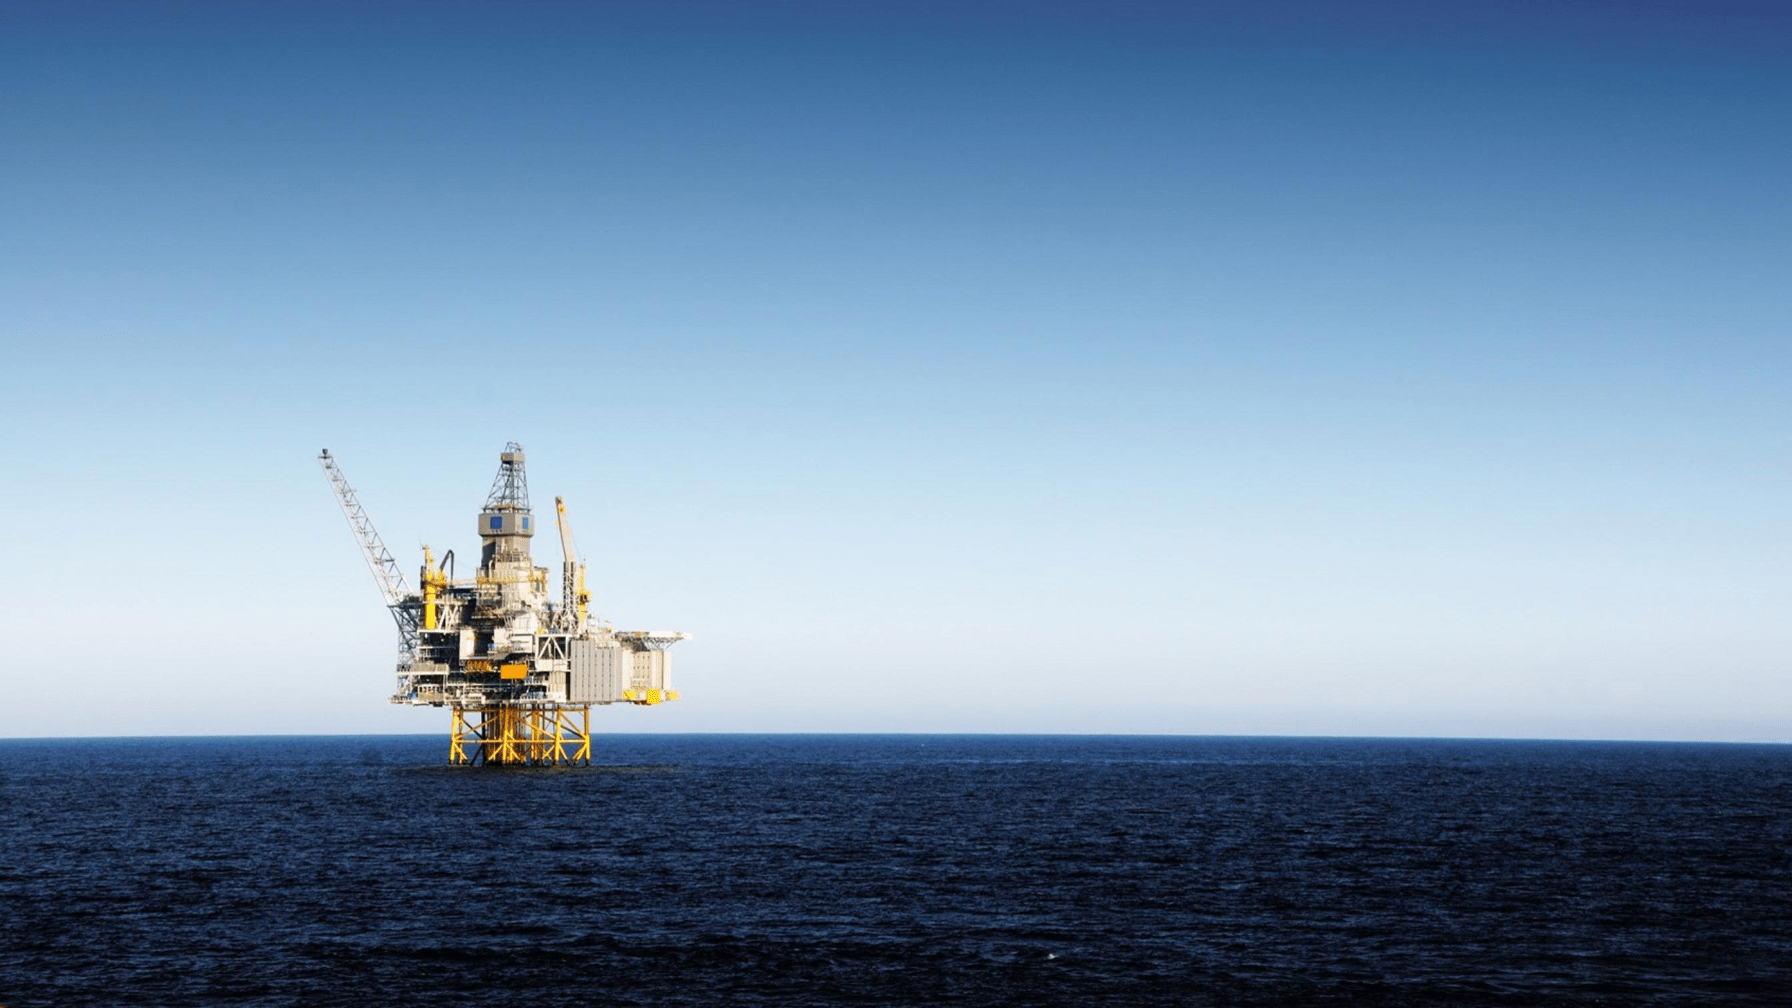 Extra offshore power for output and decommissioning